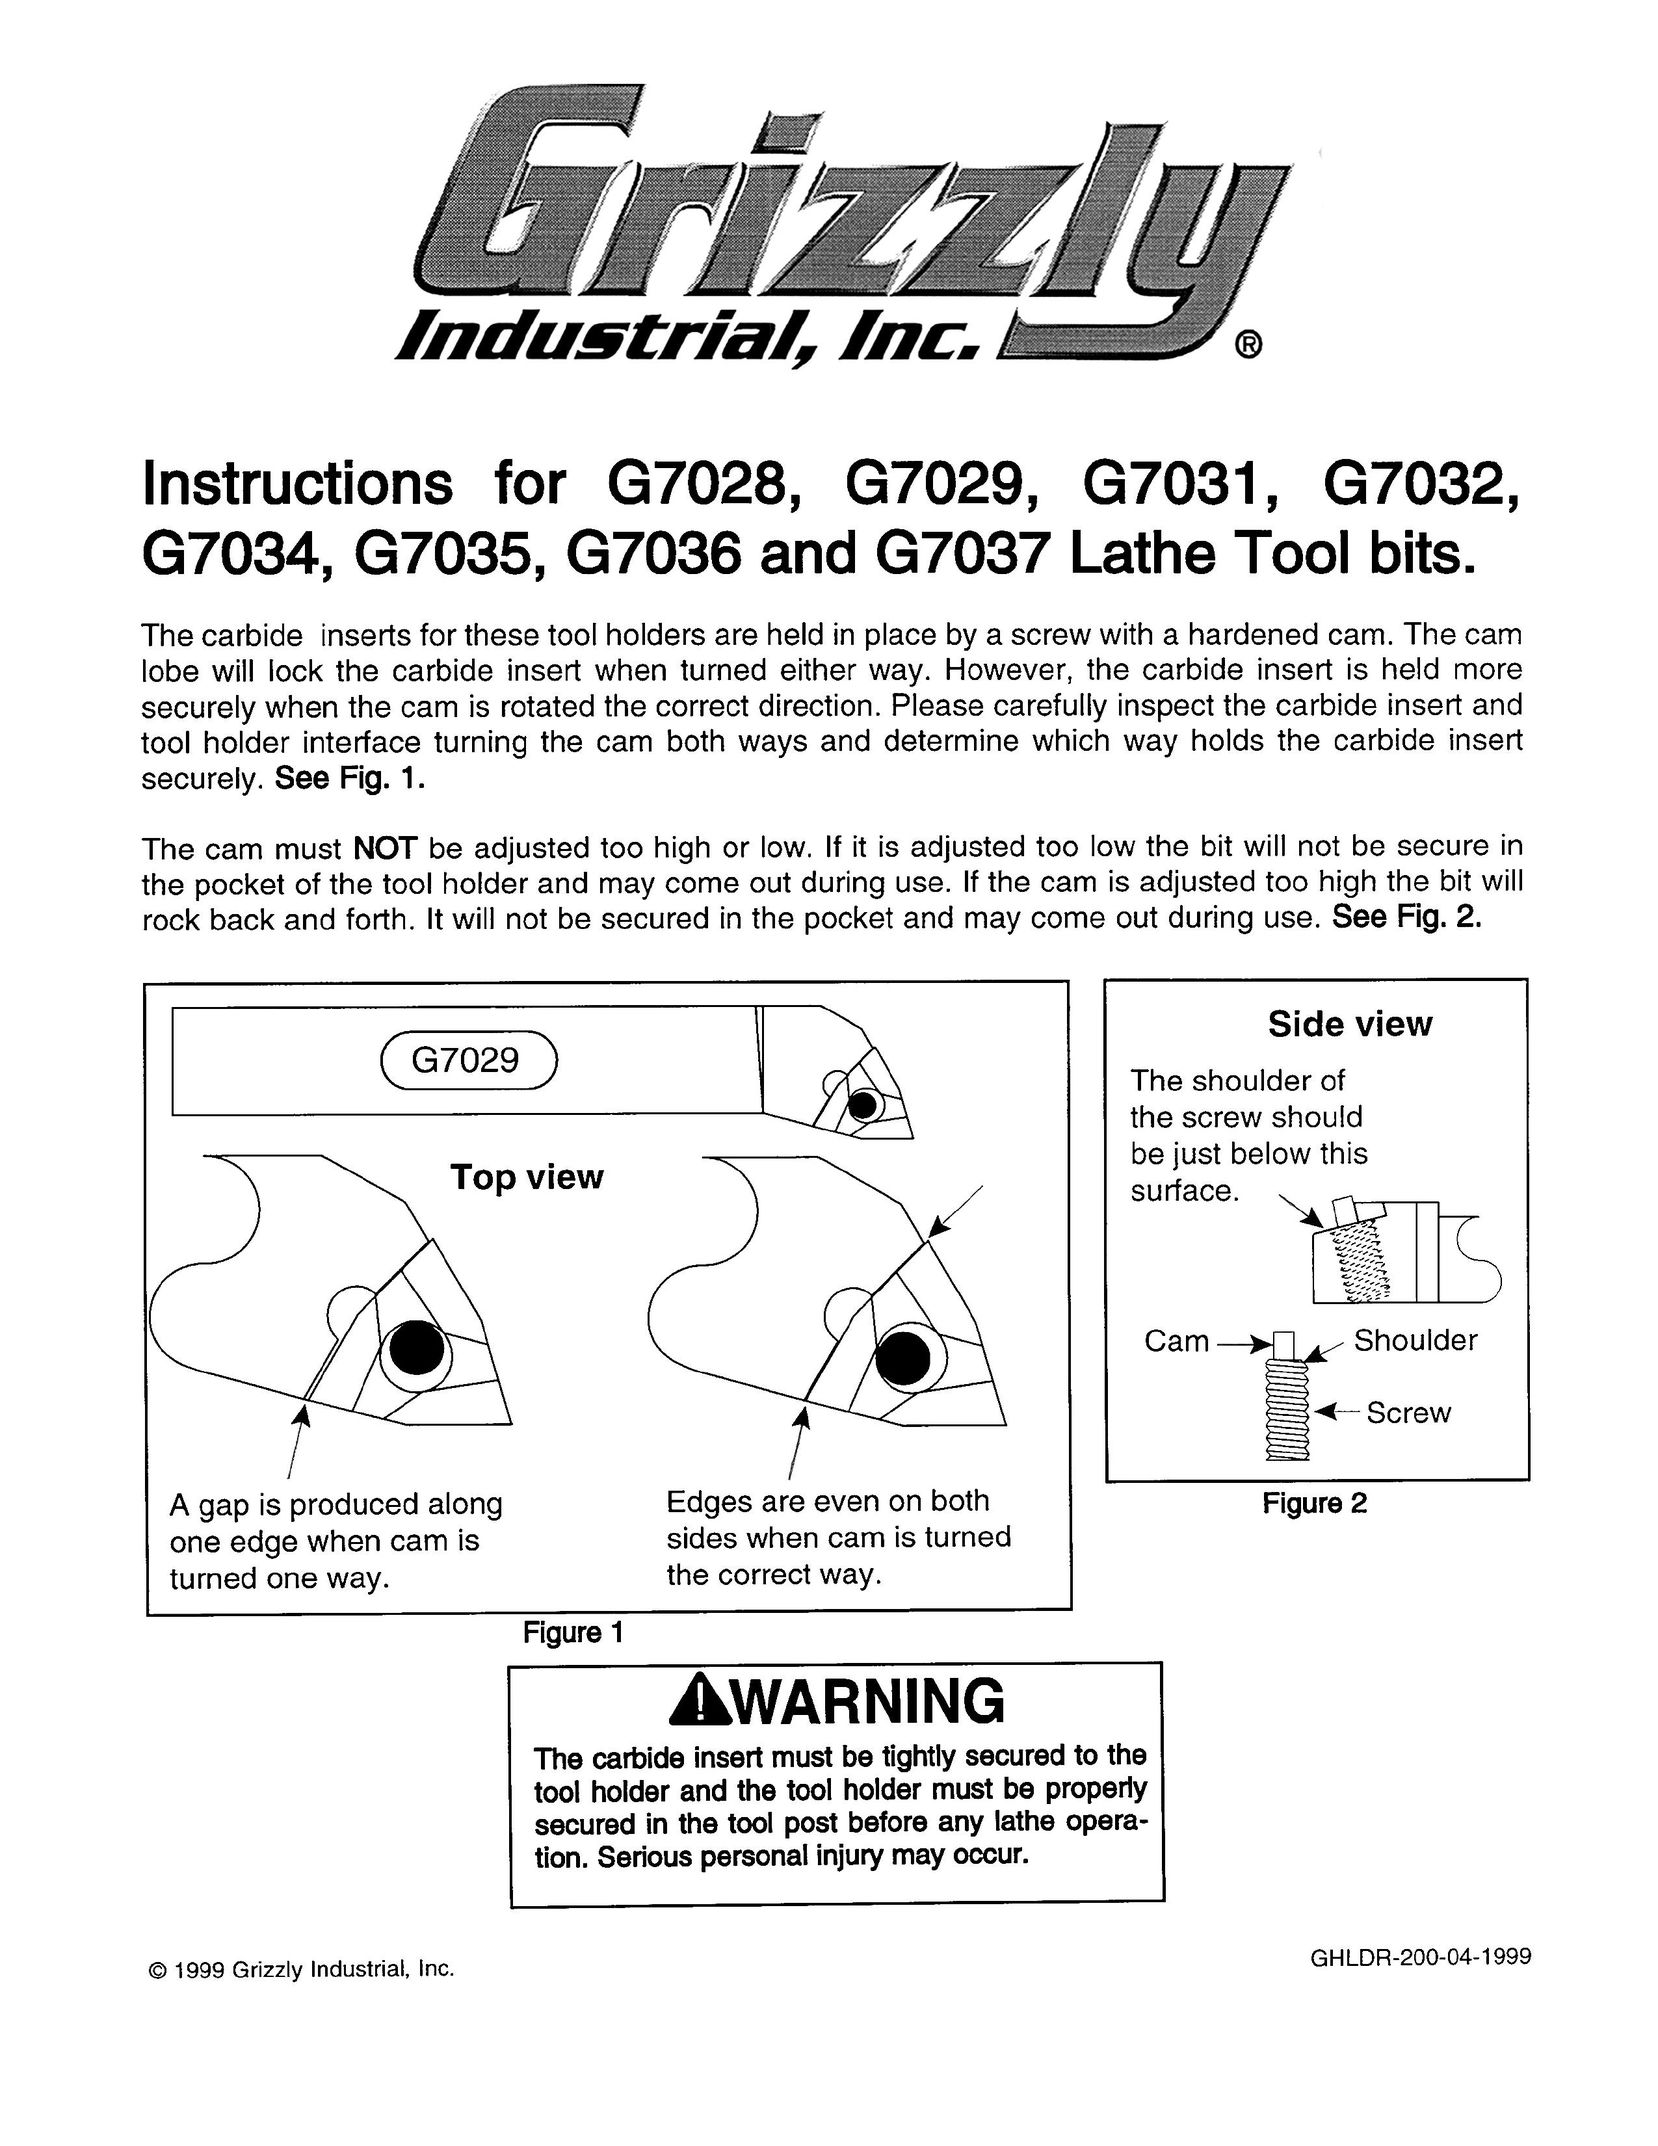 Grizzly G7028 Lathe User Manual